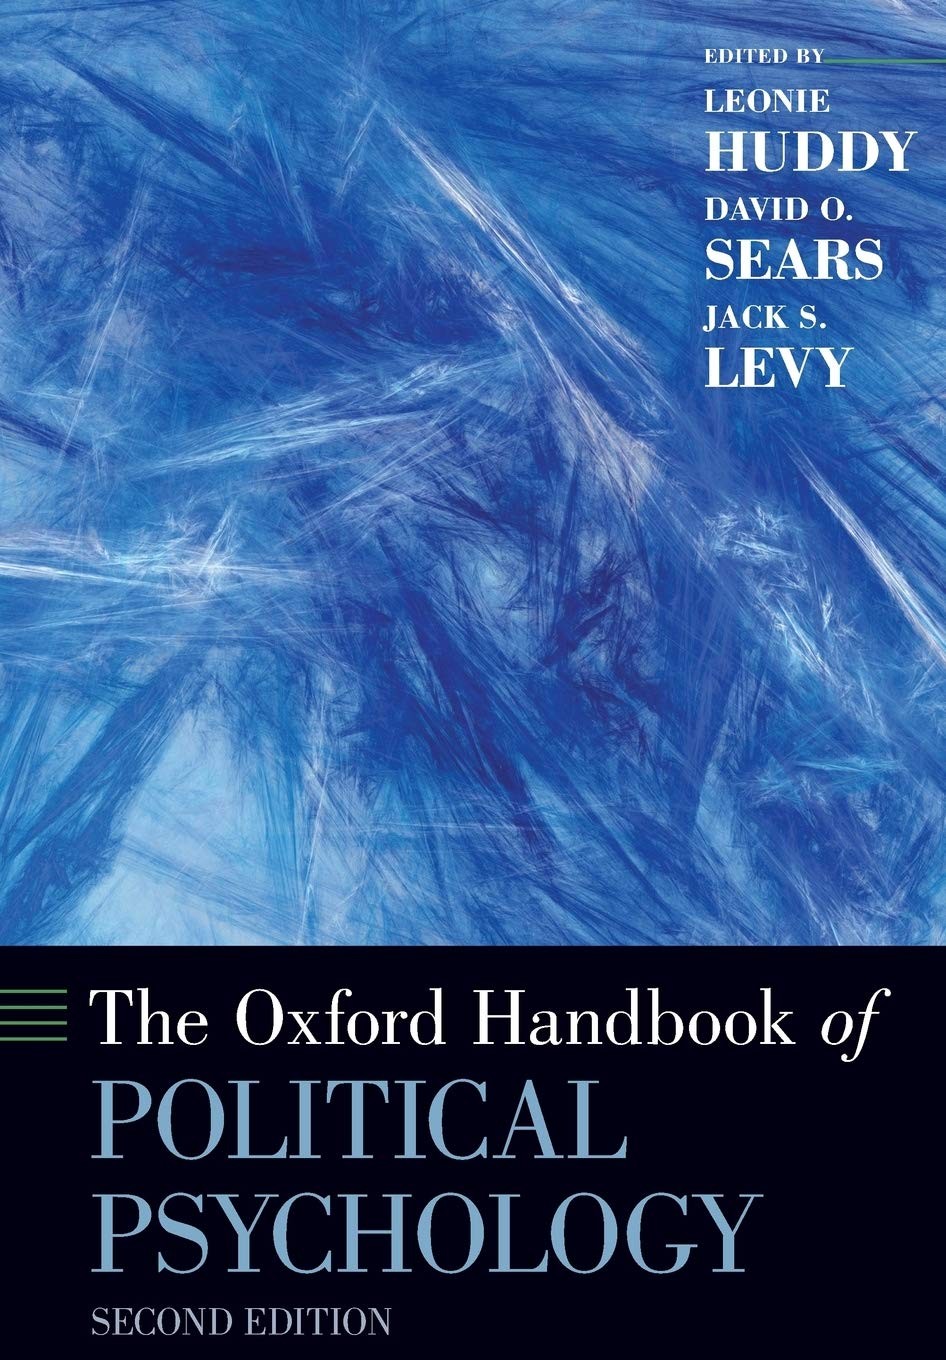 The Oxford Handbook of Political Psychology